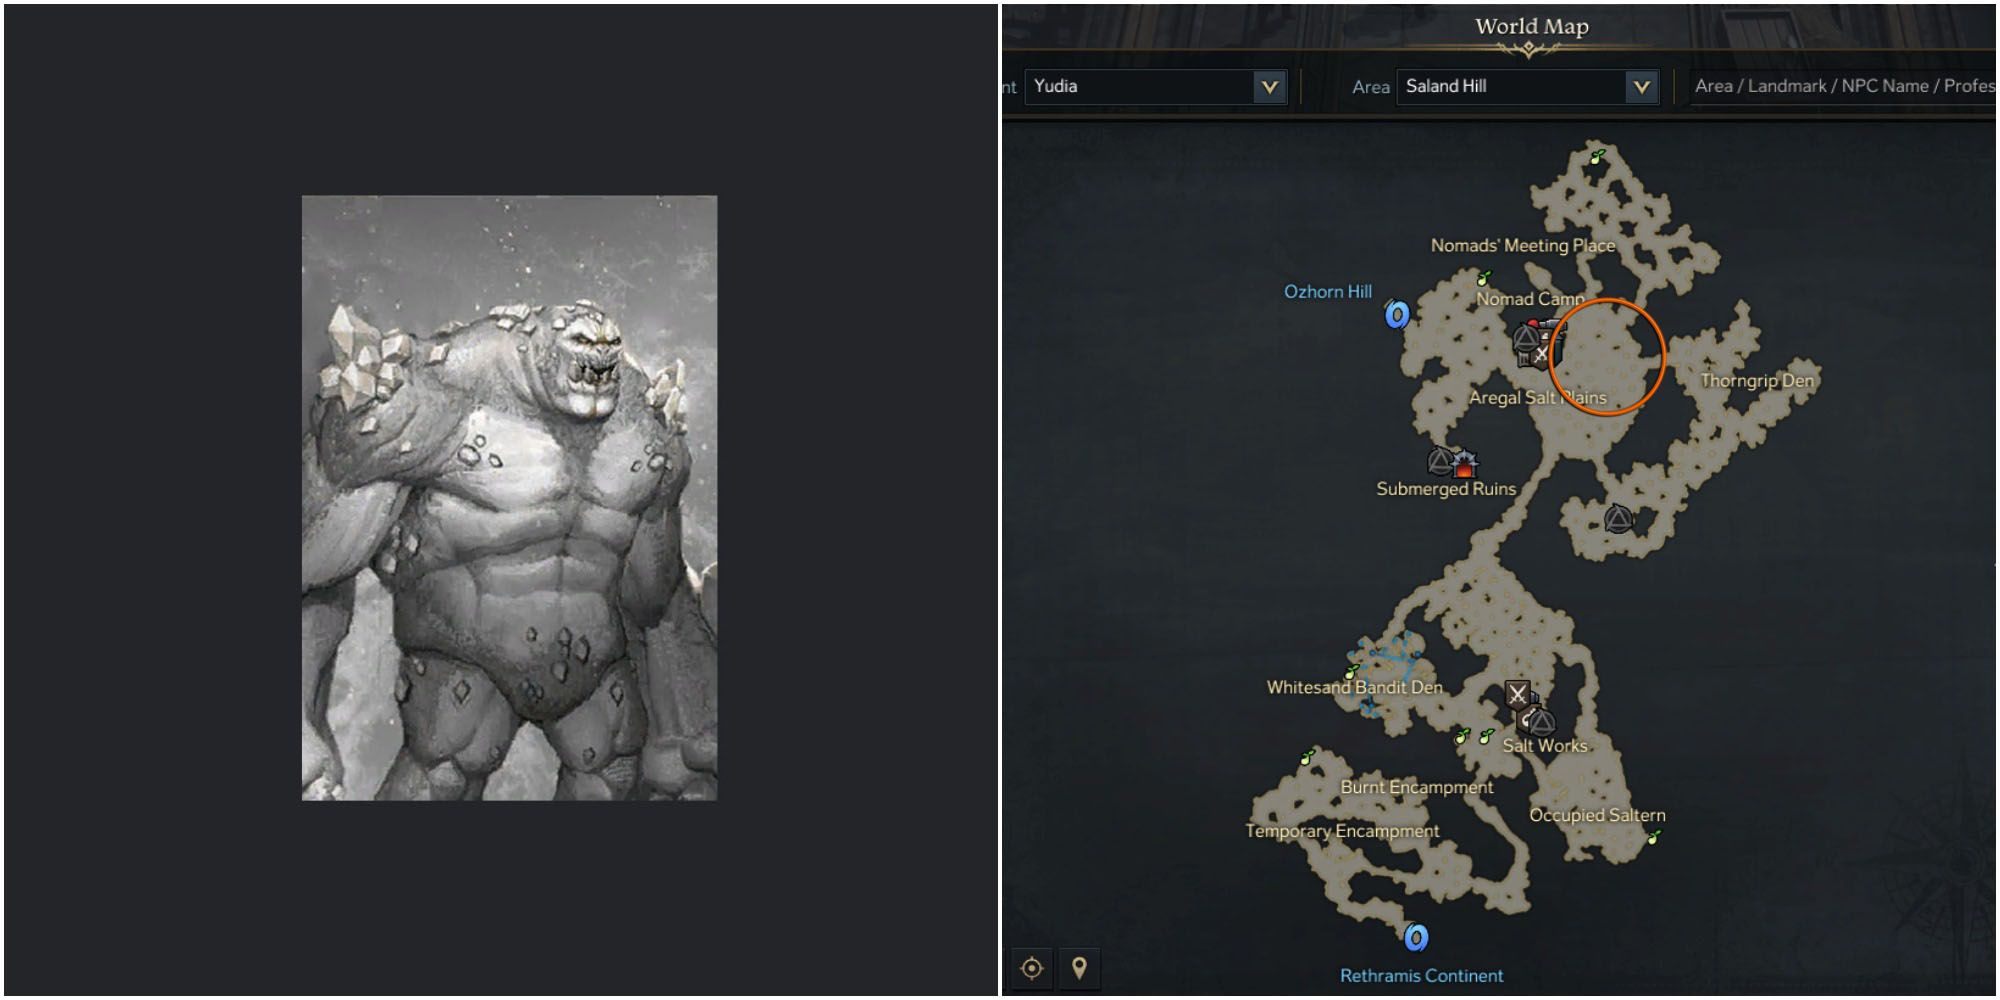 Split image of Salt Giant card and map of Saland Hill with location circled